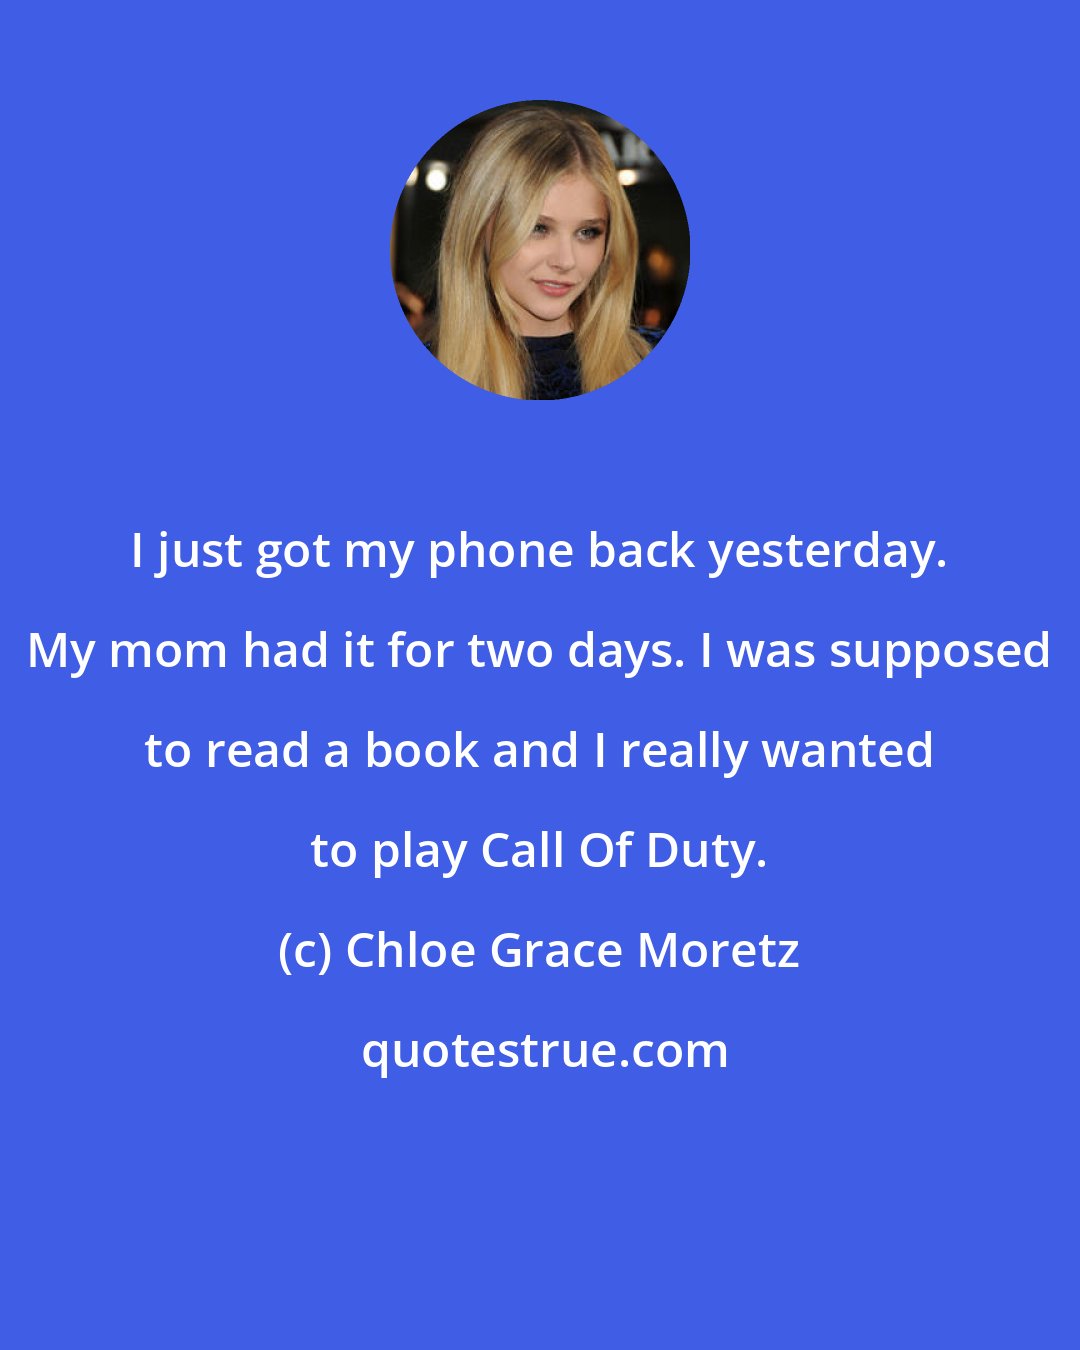 Chloe Grace Moretz: I just got my phone back yesterday. My mom had it for two days. I was supposed to read a book and I really wanted to play Call Of Duty.